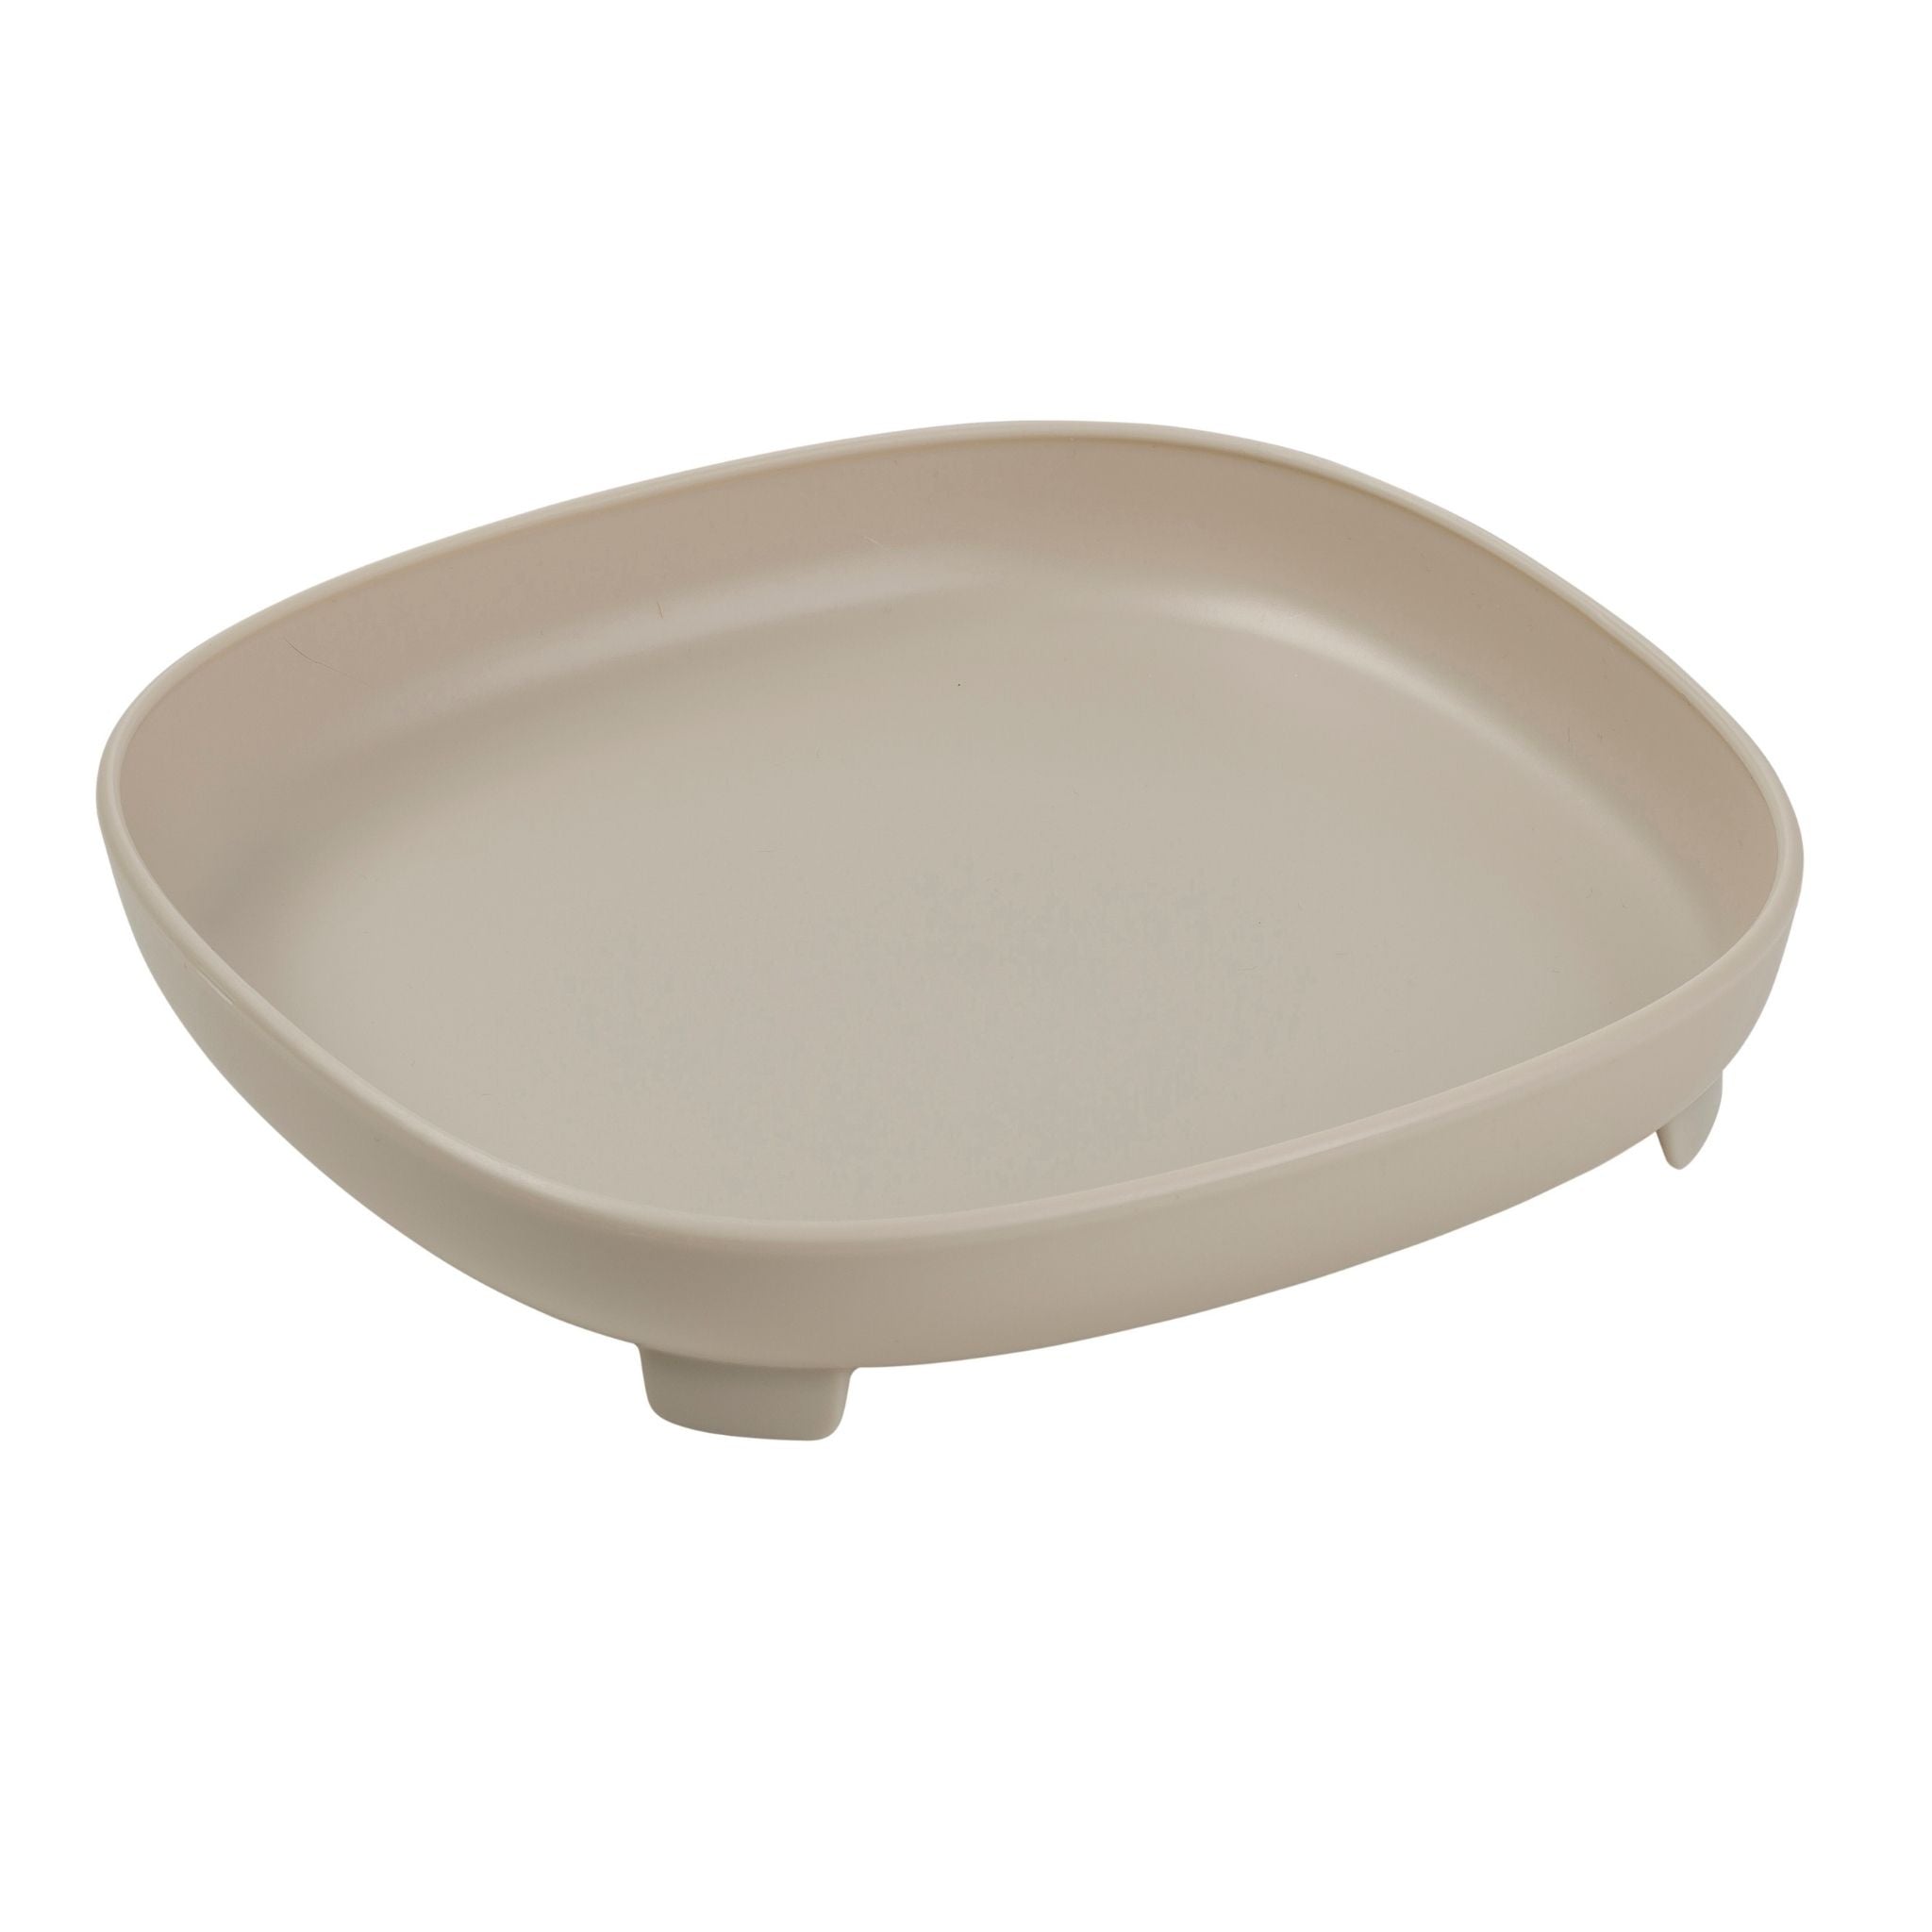 2 in 1 suction plate latte